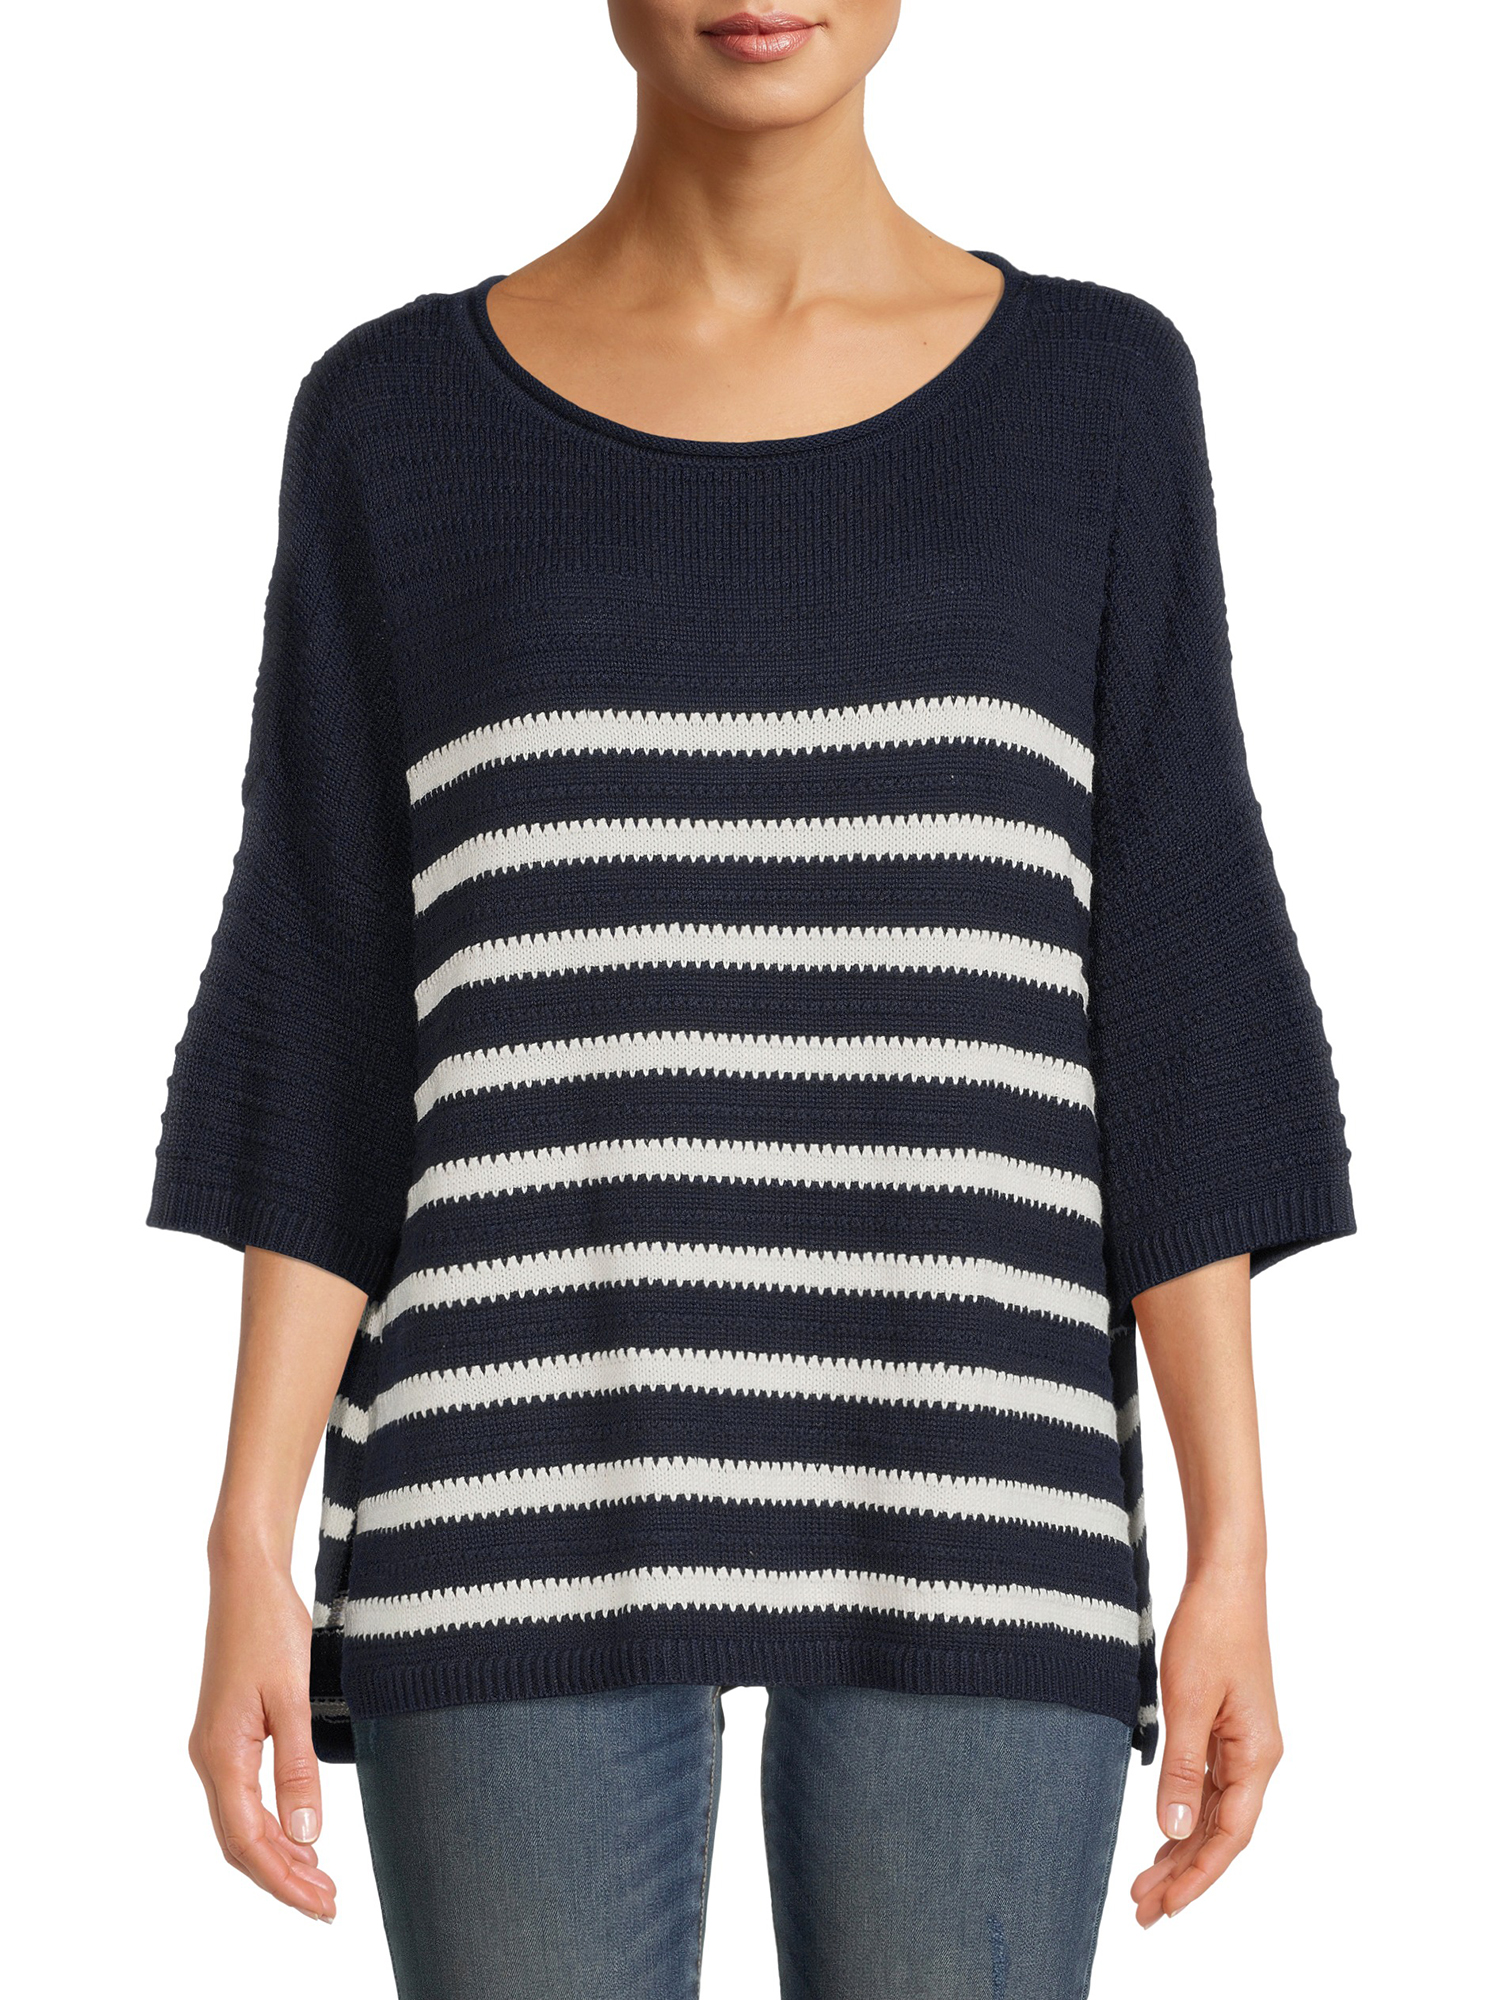 Time and Tru Women’s Boatneck Sweater - image 1 of 5